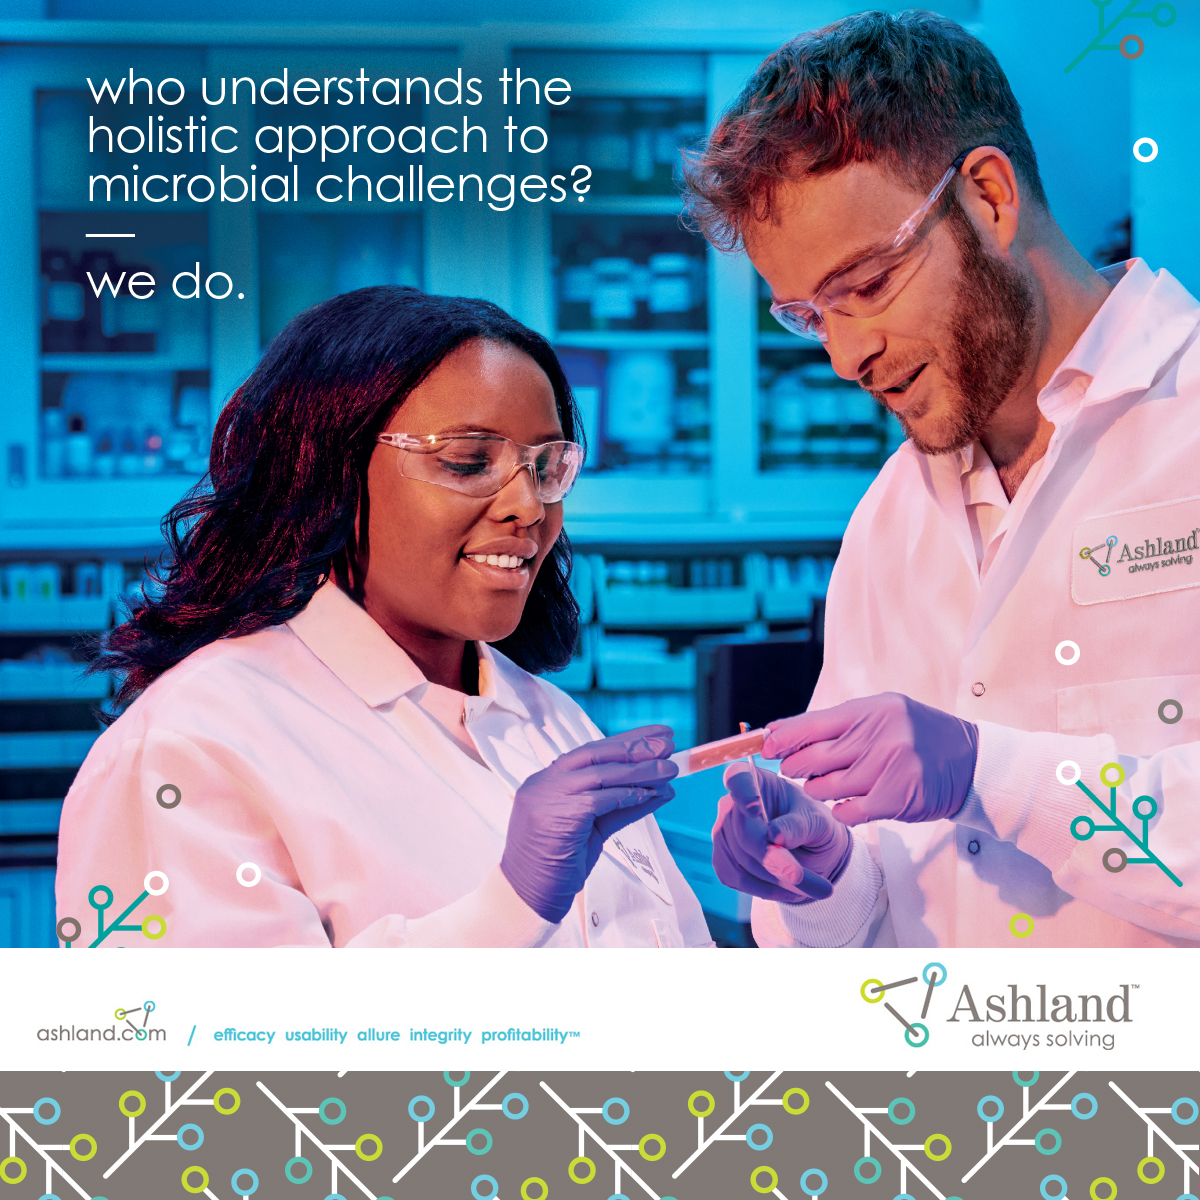 Who understands the holistic approach to microbial challenges? We do. Ashland's holistic 360° approach examines product safety from all angles. Meet Ashland solvers at in-cosmetics Global 2024, booth 2C60. bit.ly/3JmxXH9 #incosglobal